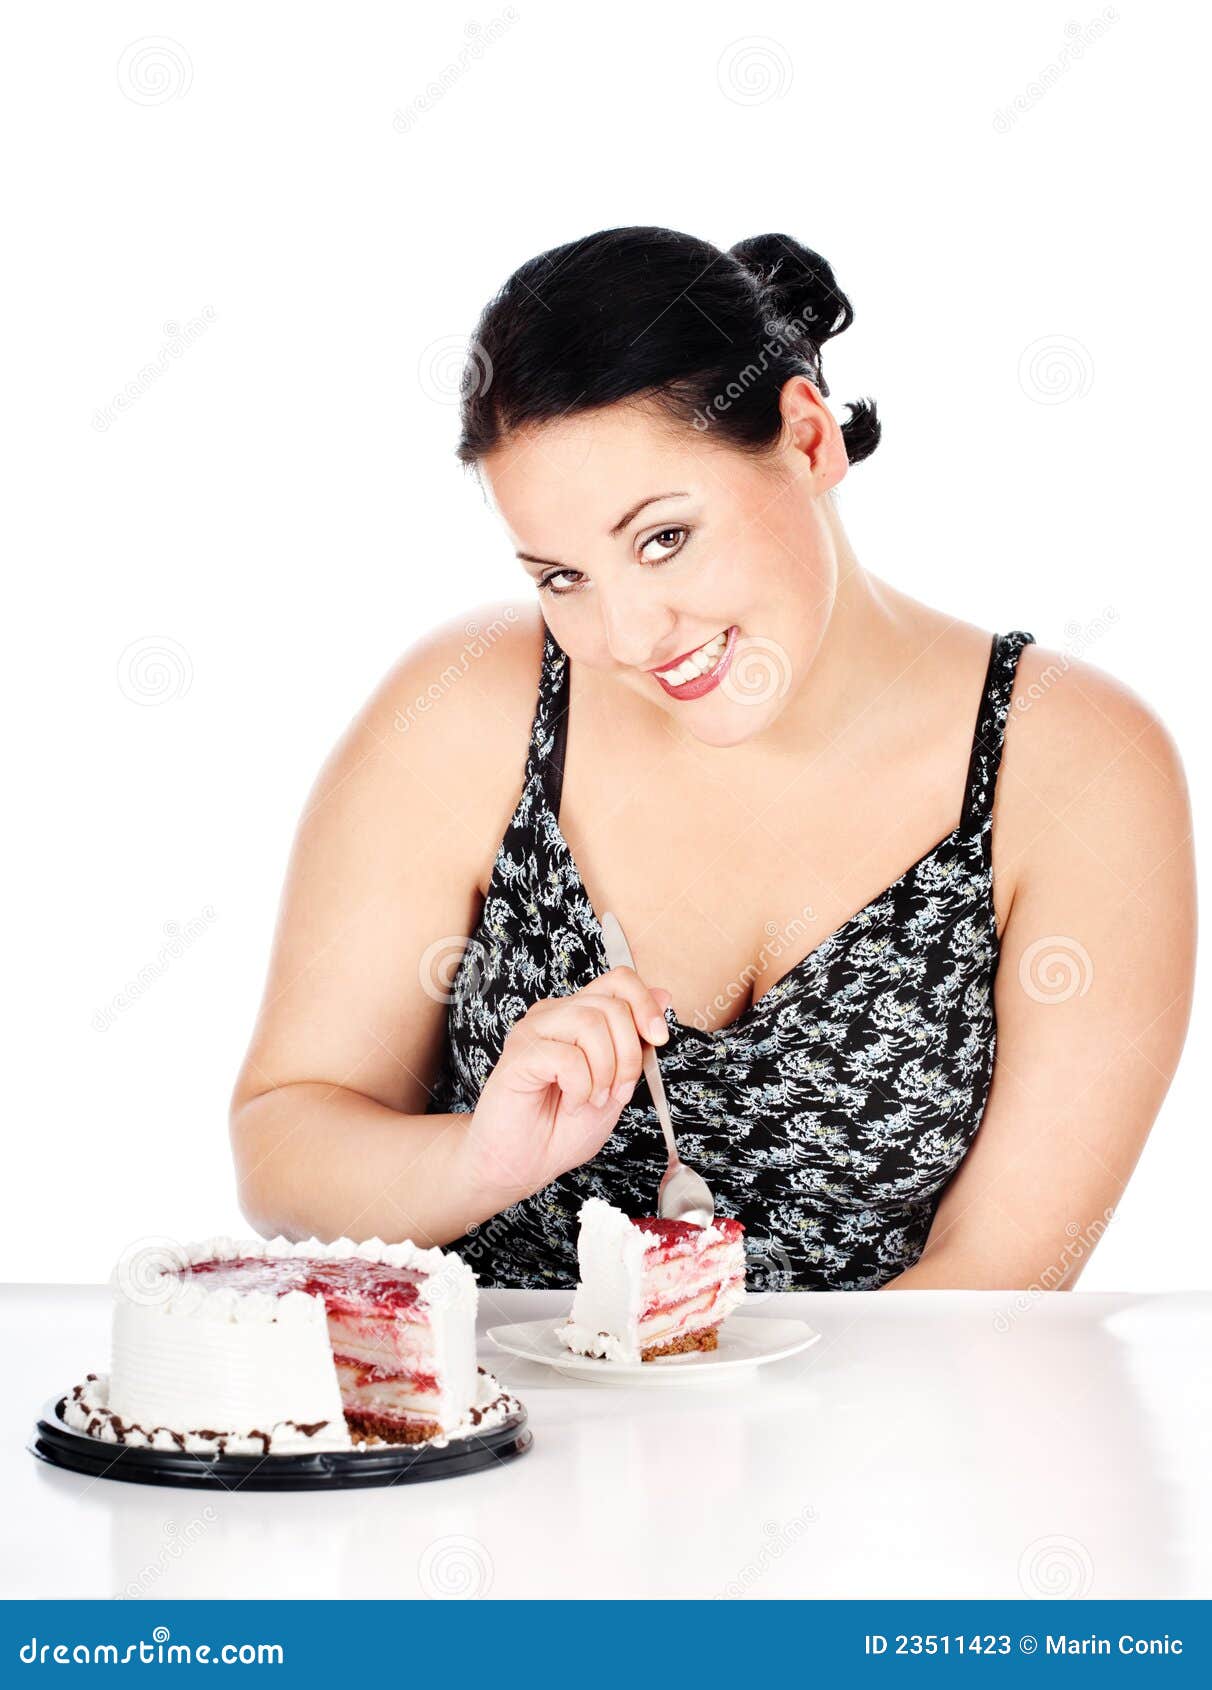 slice of cake and chubby woman